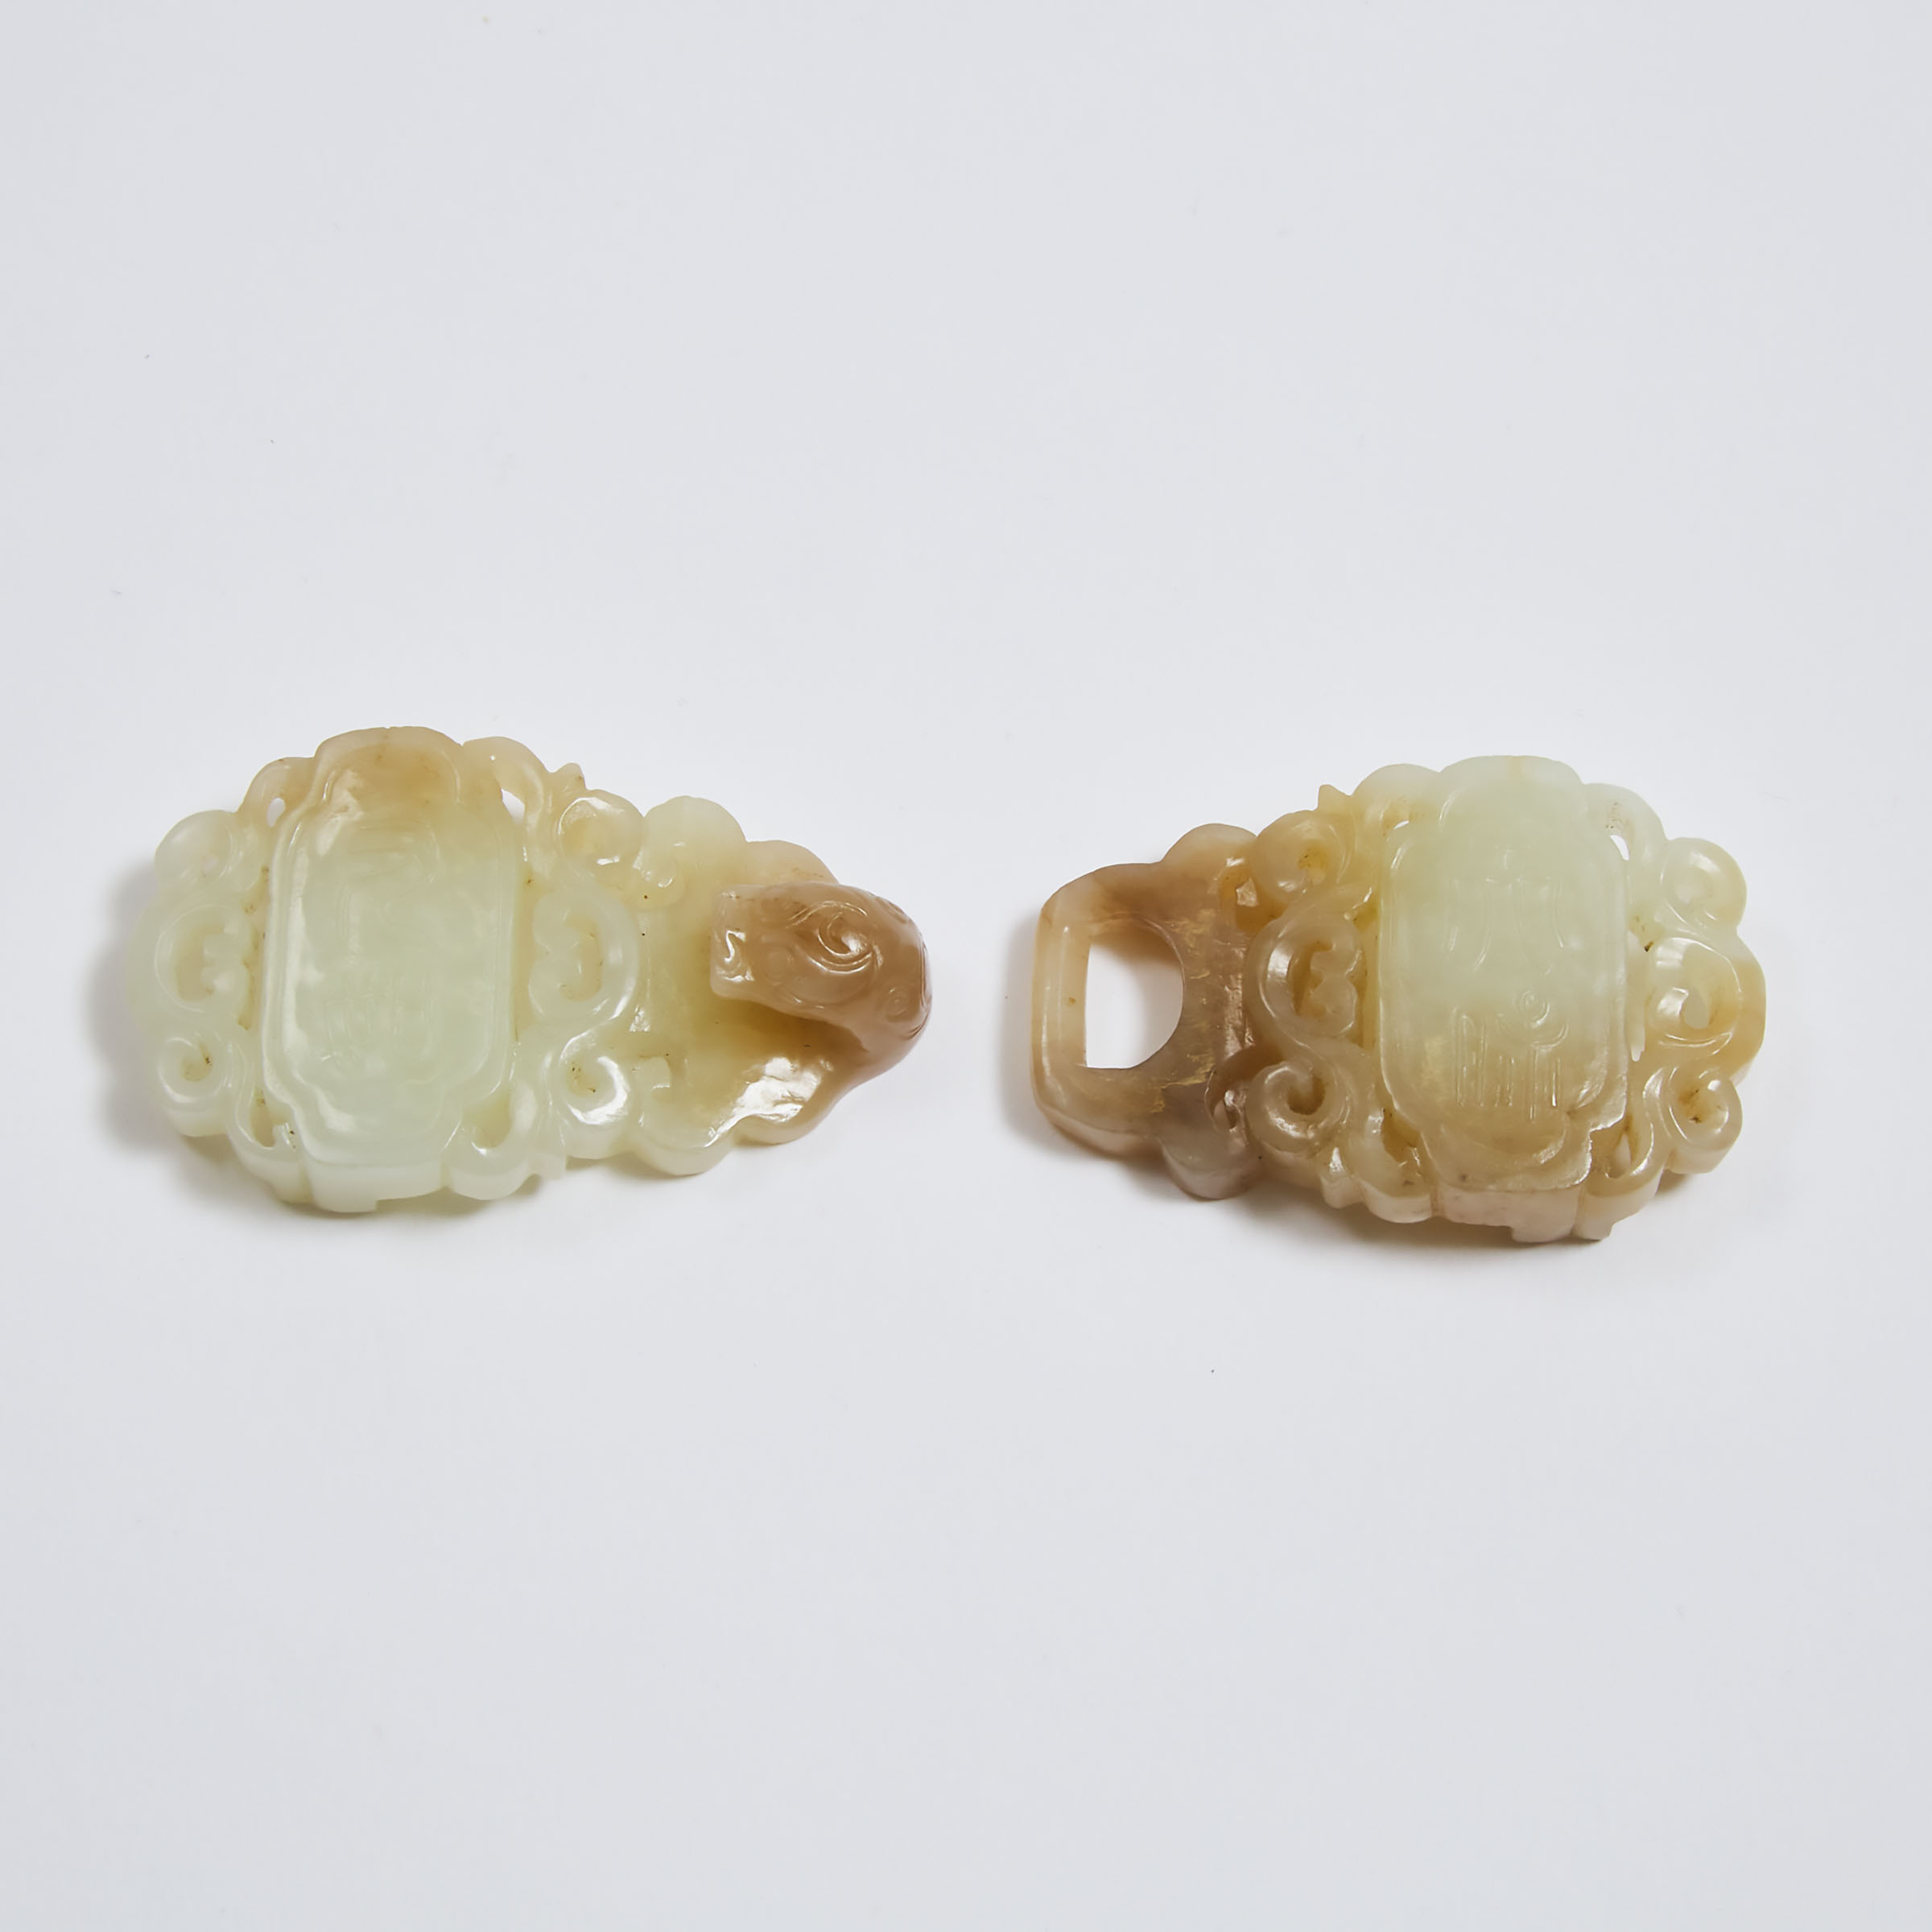 A White and Russet Jade Openwork 'Chilong' Belt Hook, 18th/19th Century